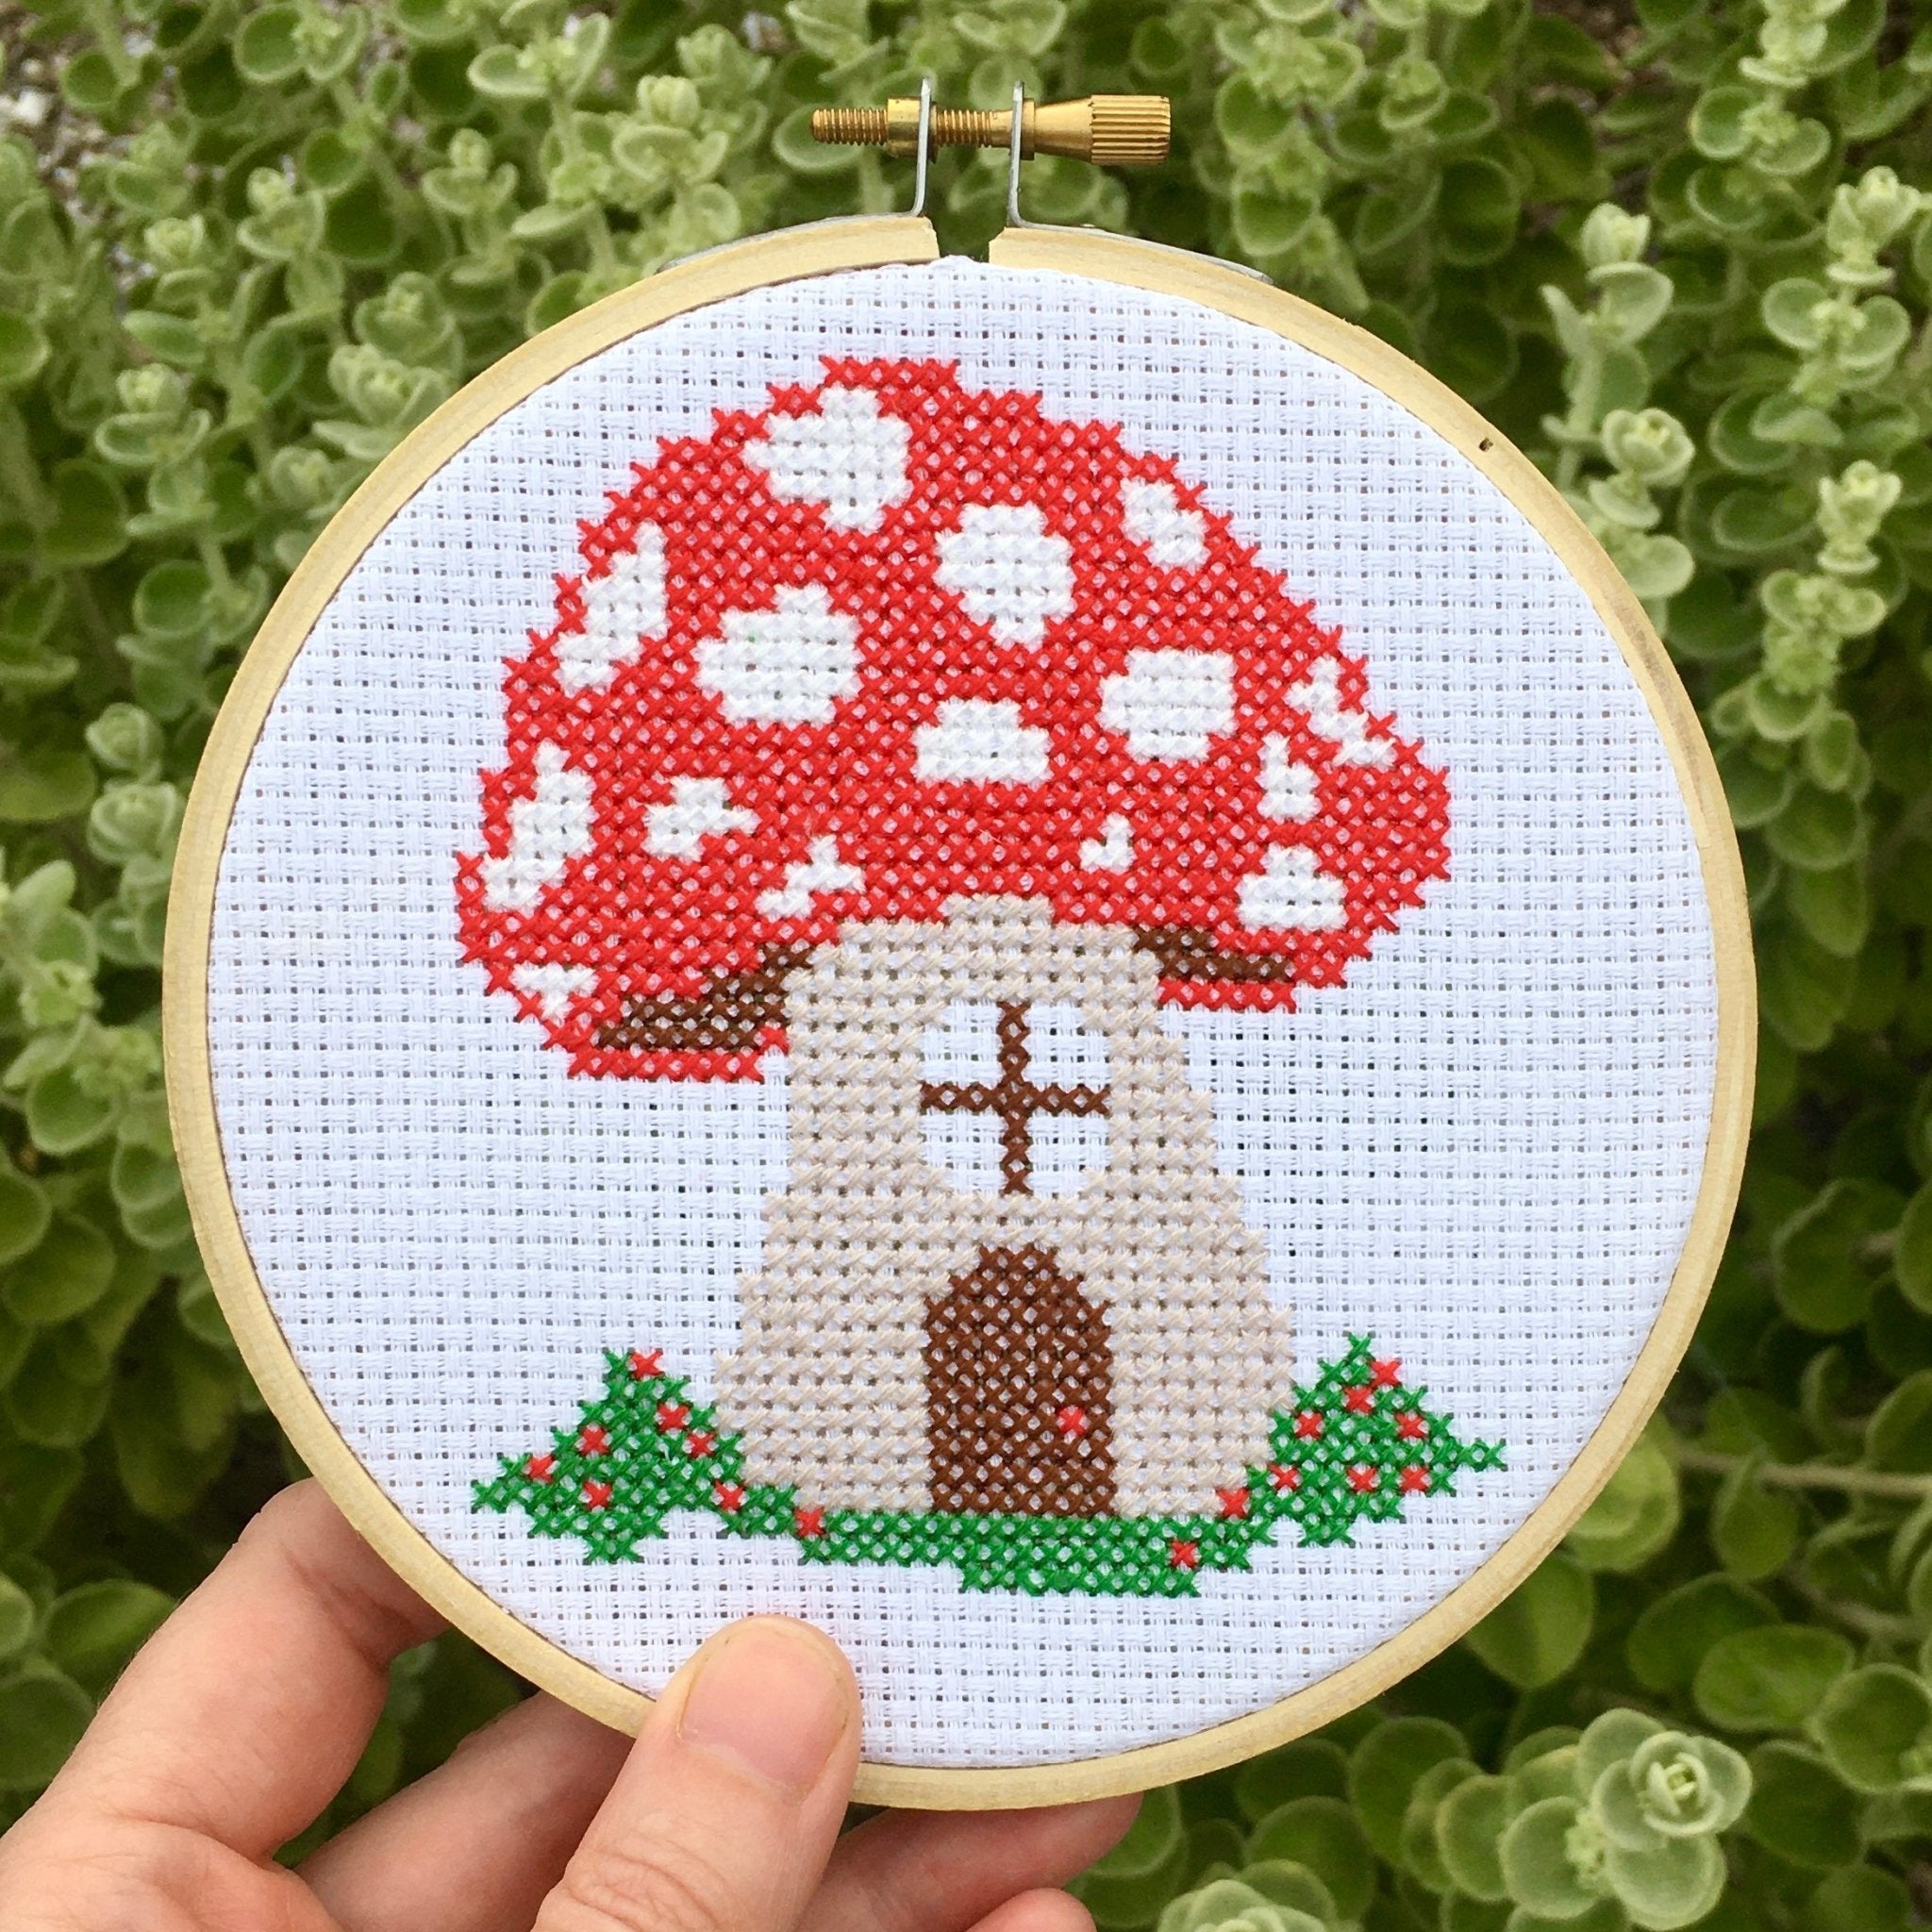 Stamped Cross Stitch Kits Mushroom Cross Stitch Ornament Kits for Adults  Beginners Arts and Crafts Embroidery Kits Full Range of Cross-Stitch  Stamped Kits Needlecrafts for Home Wall Decor 12x16 inch